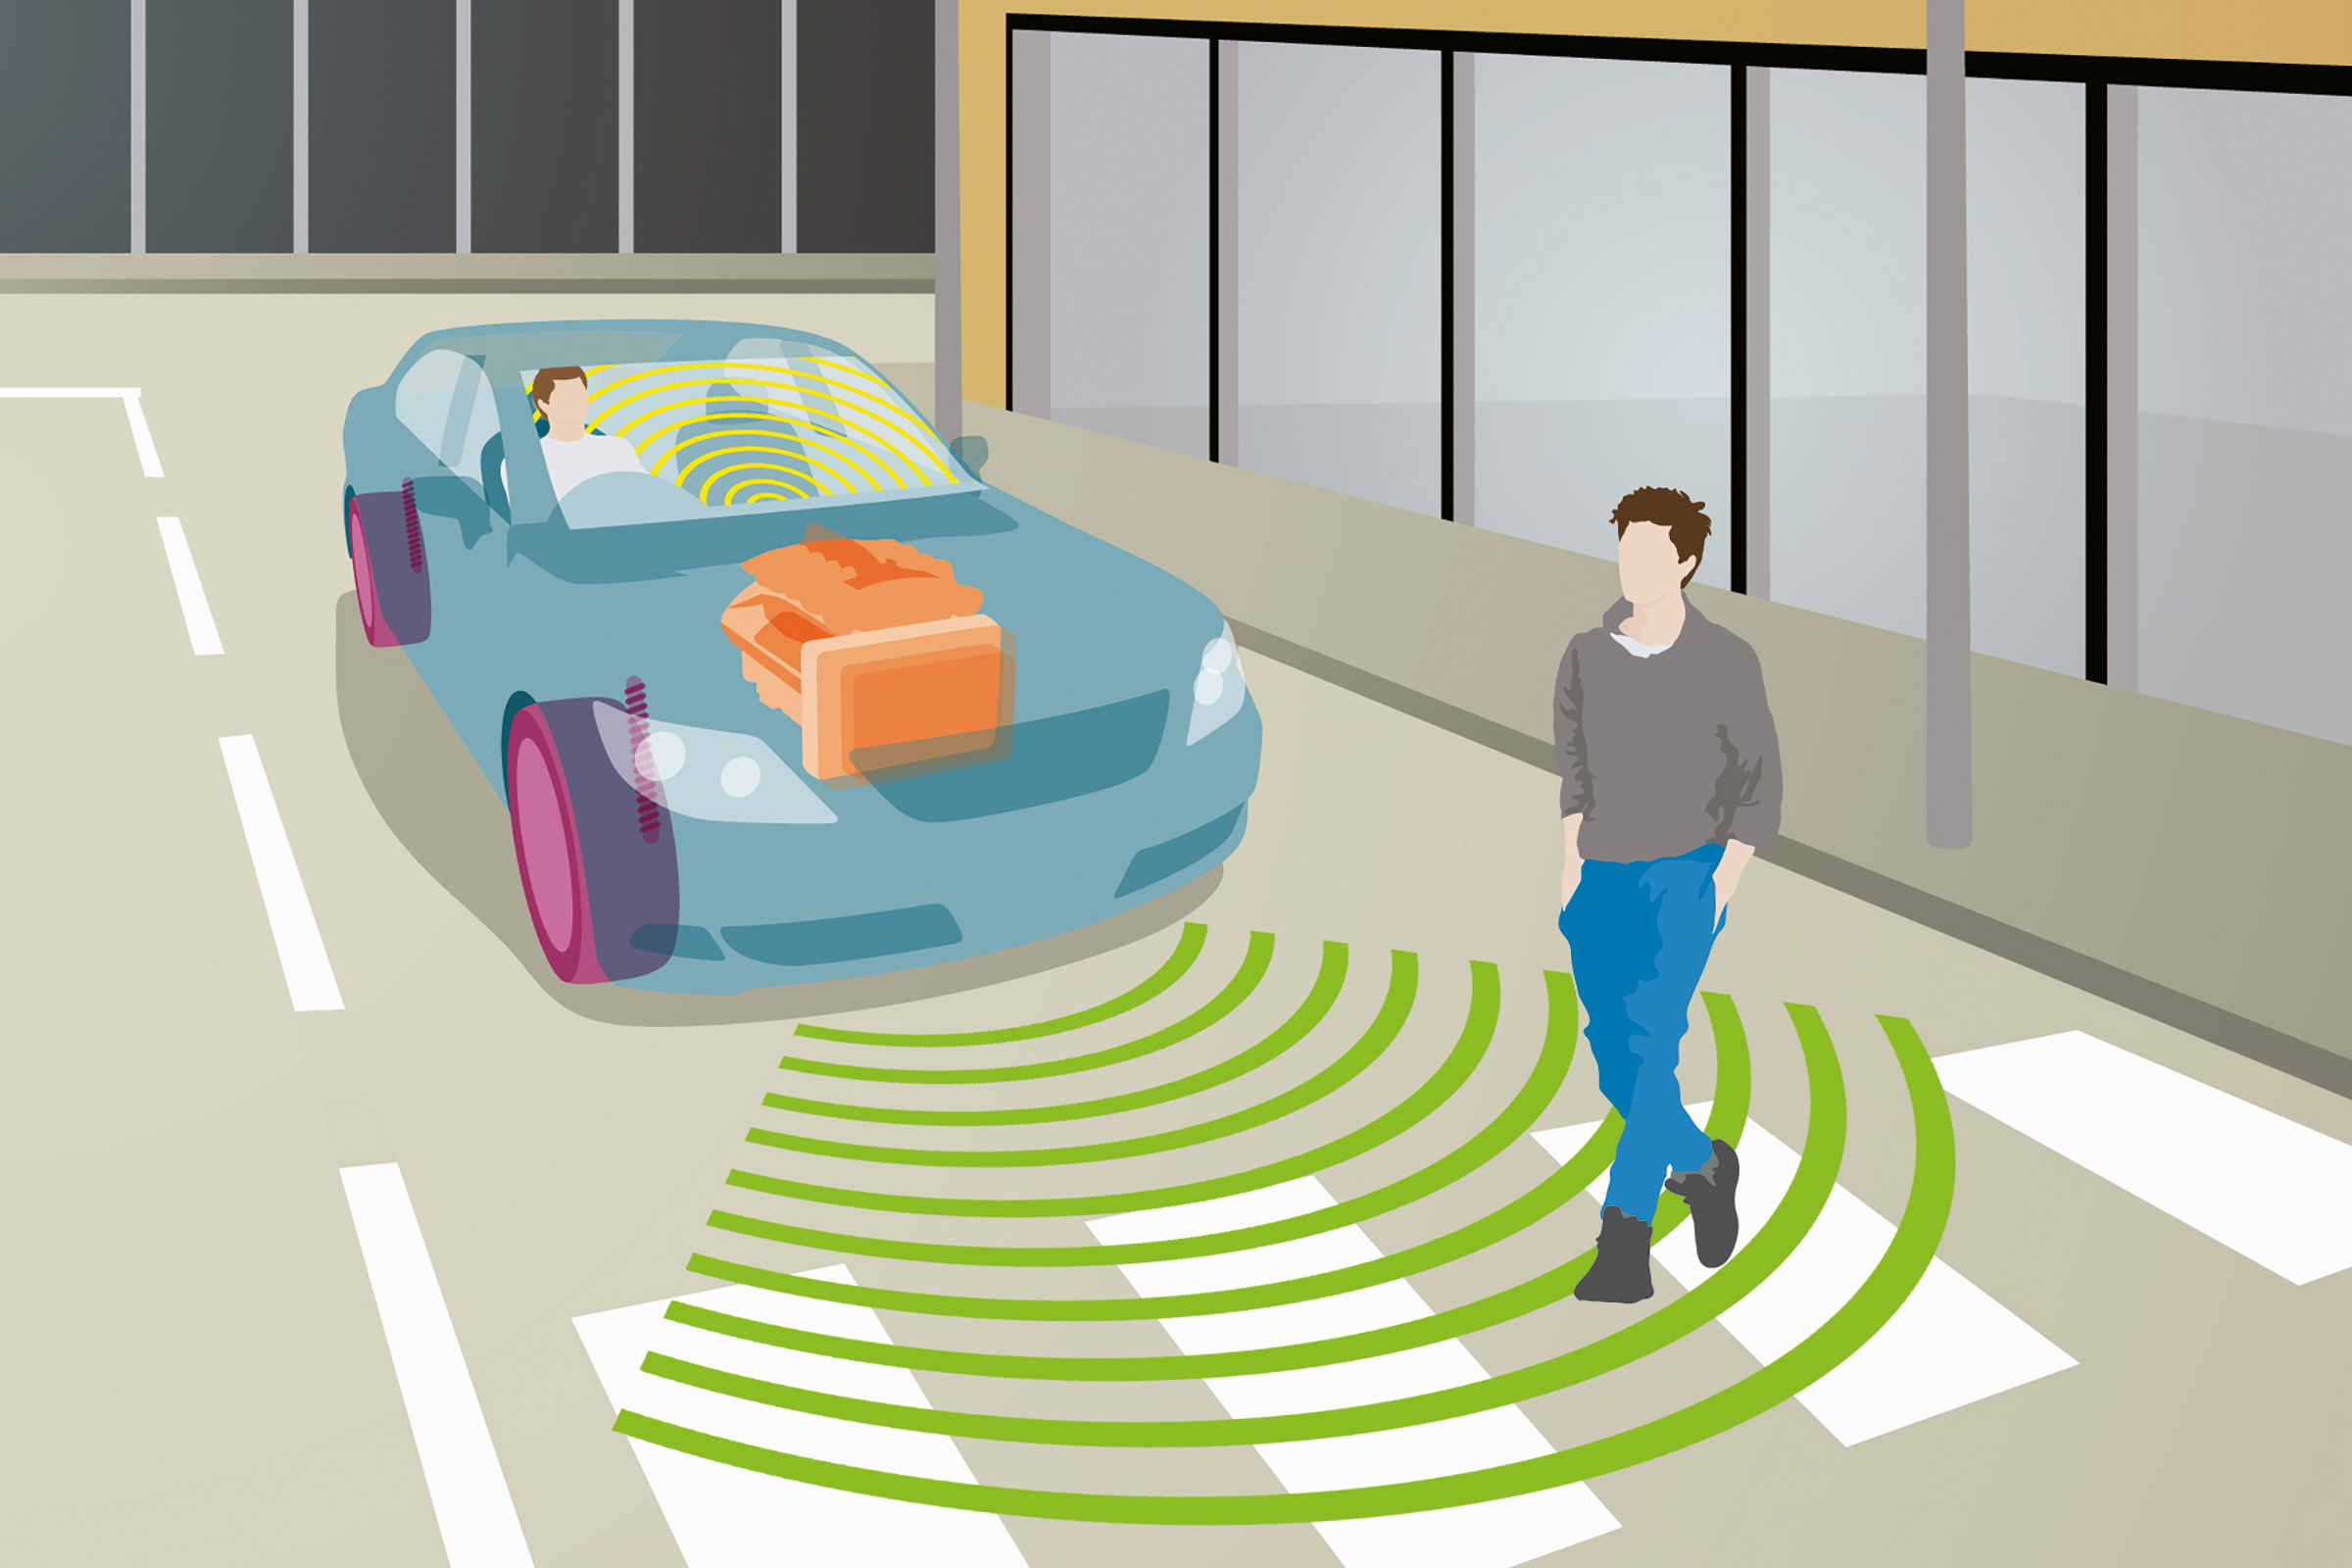 New electric cars must have audible warning system for pedestrians